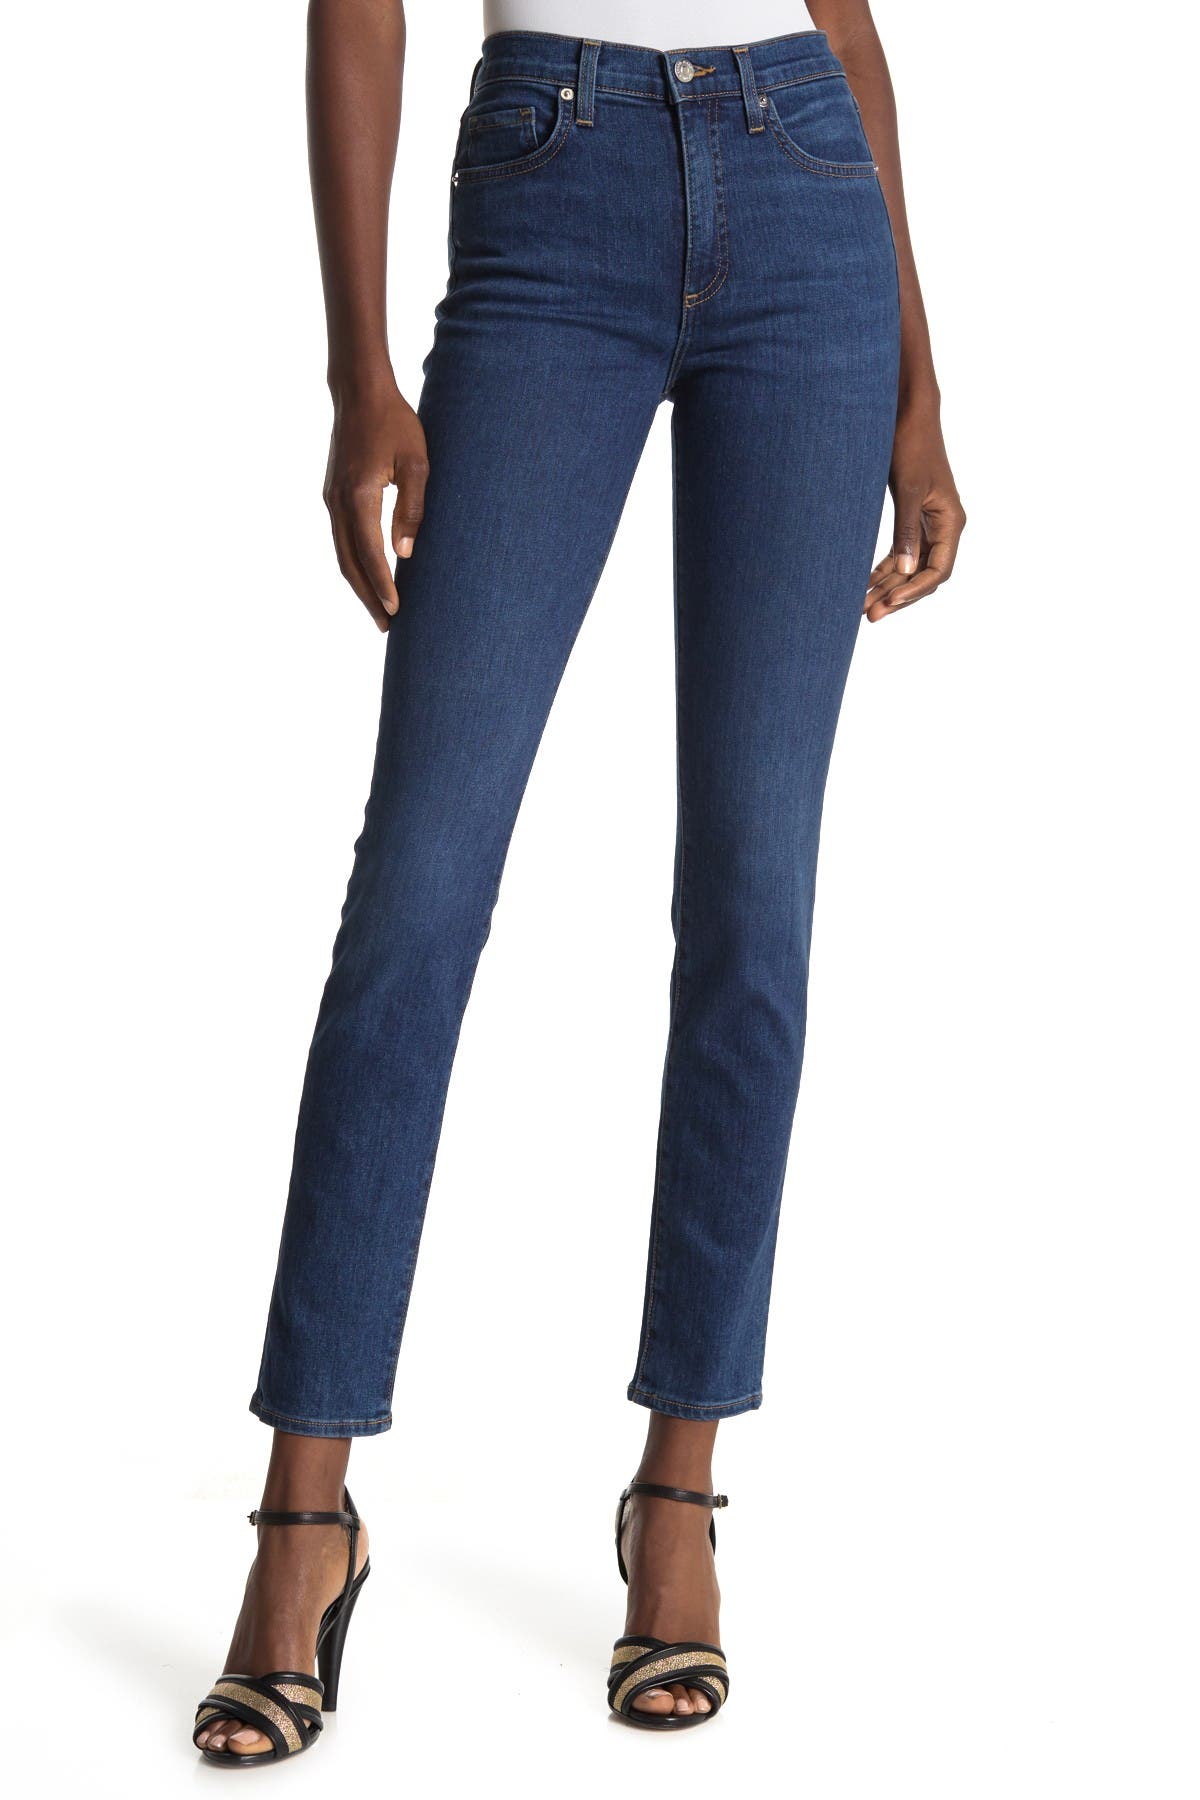 best jeans for tall women